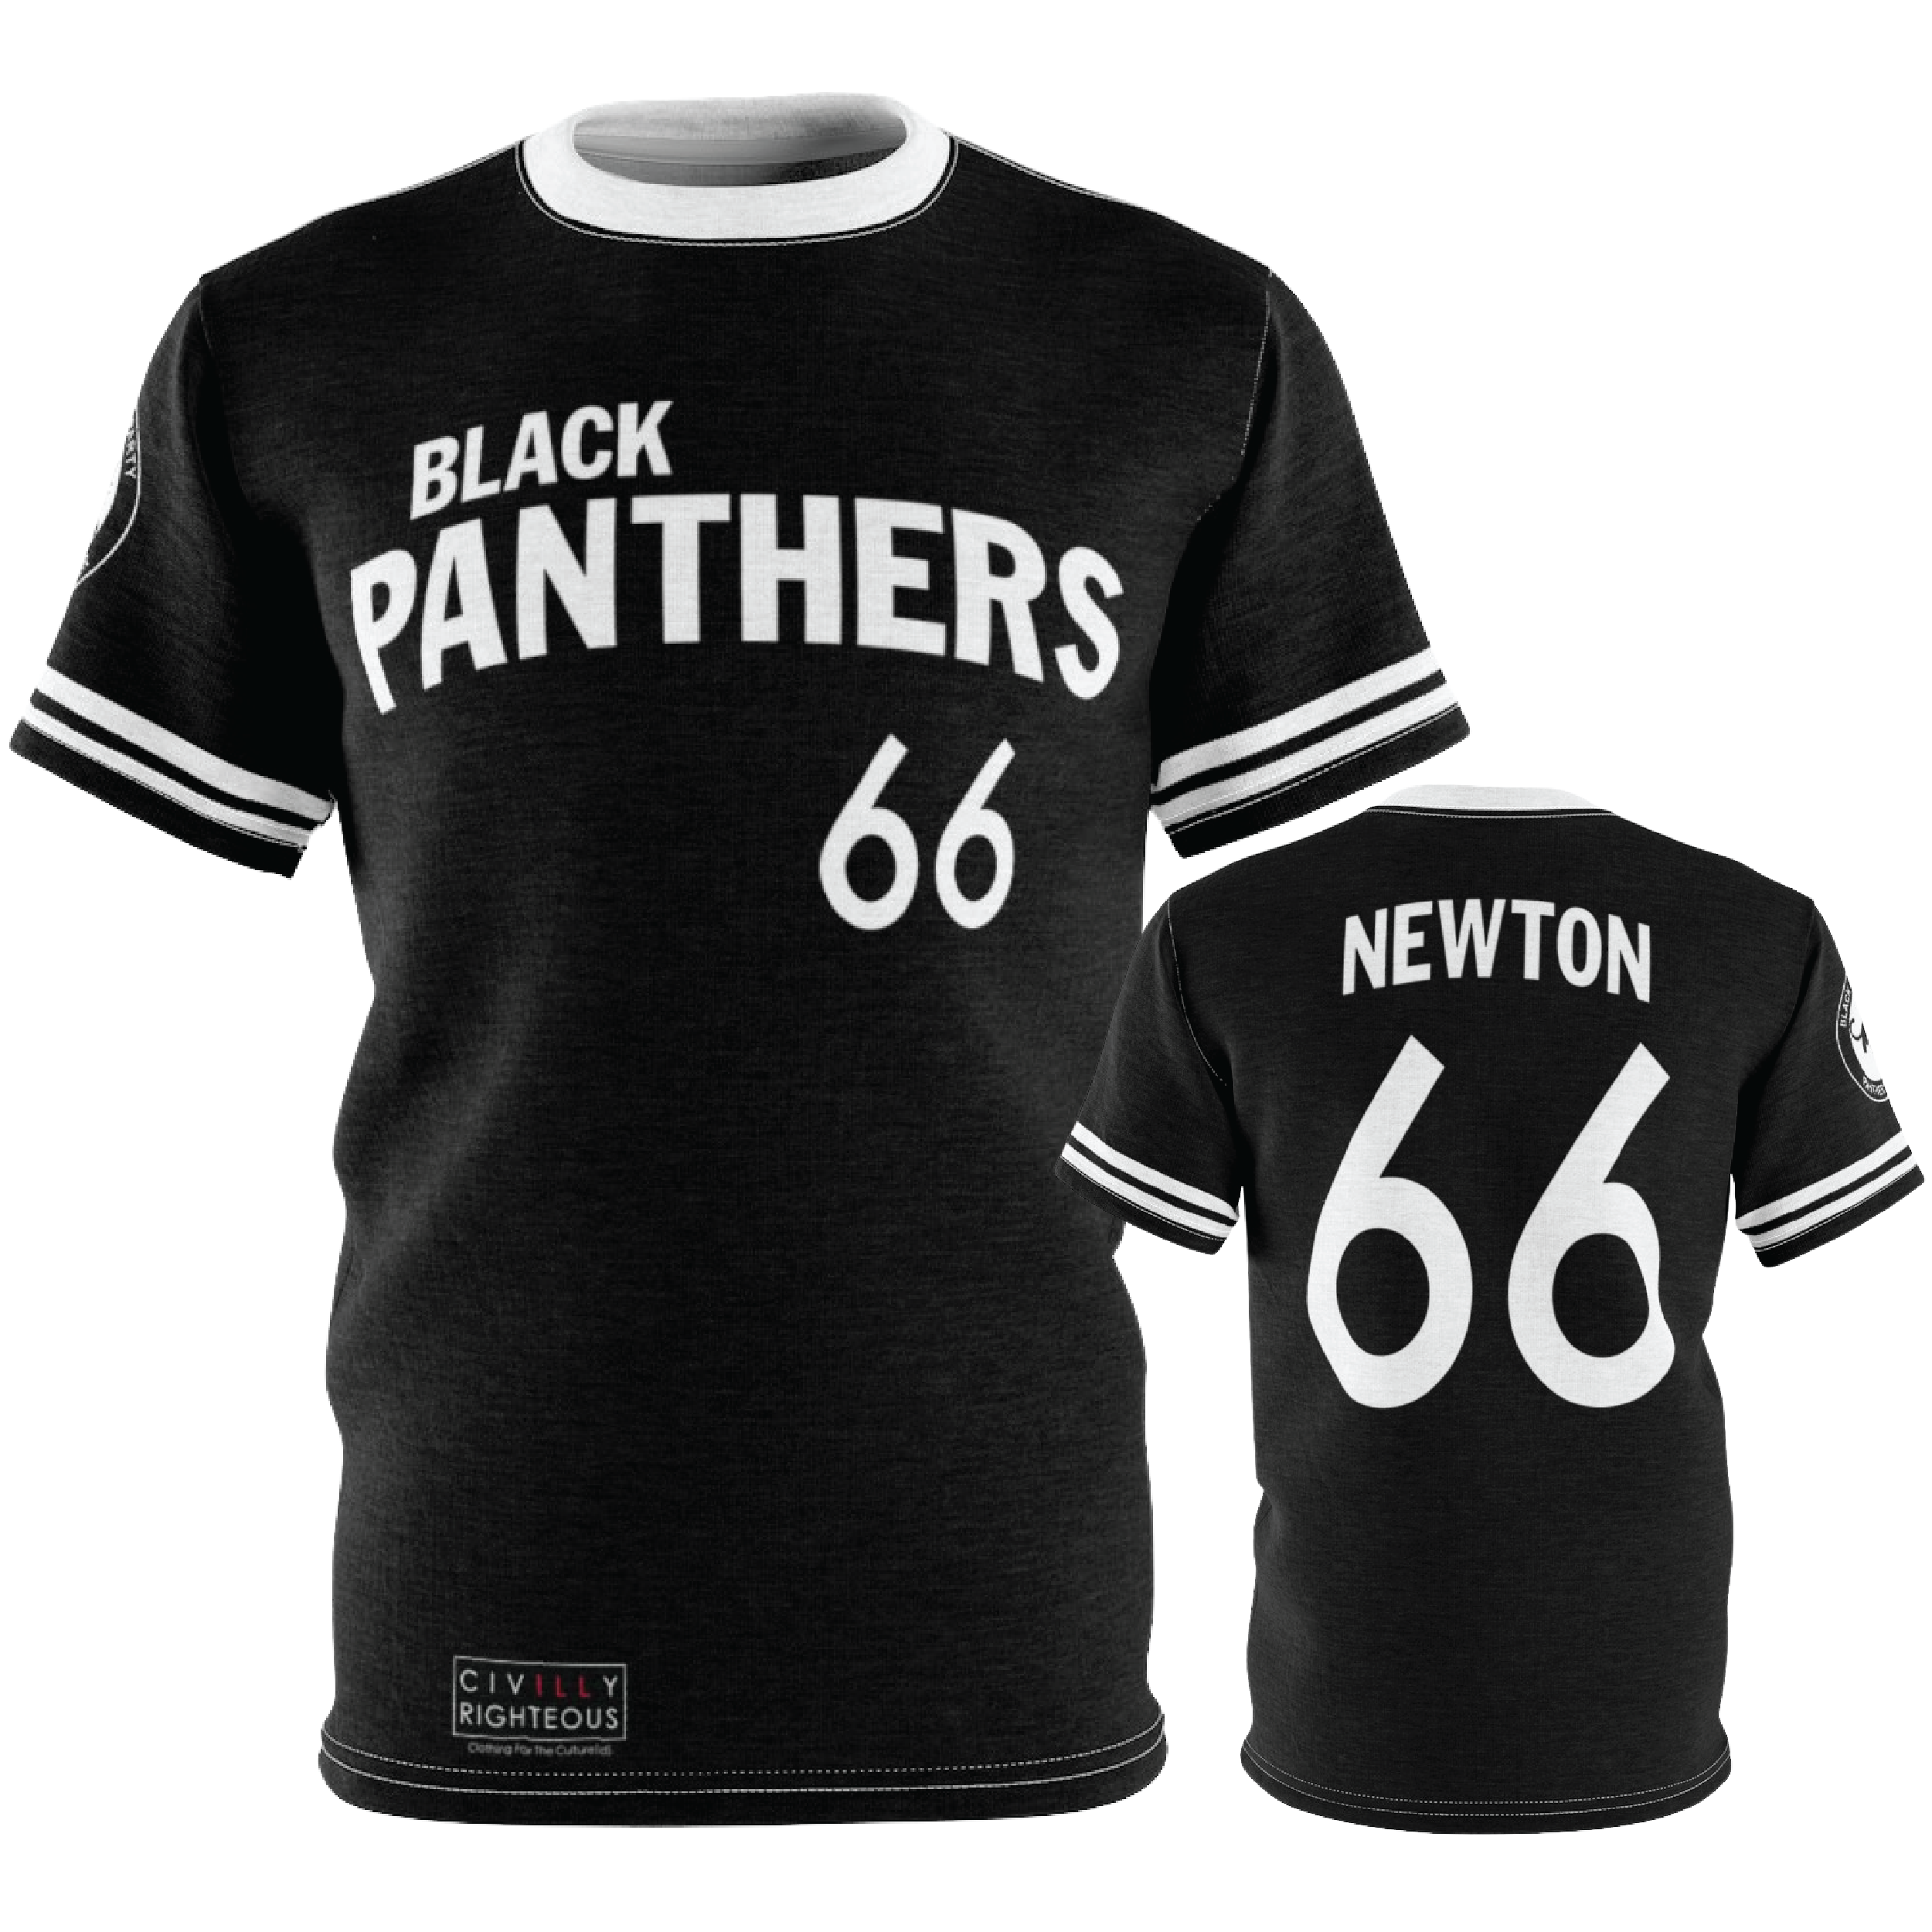 Huey Newton, Black Panthers - Unisex Pullover Jersey – Civilly Righteous  Clothing